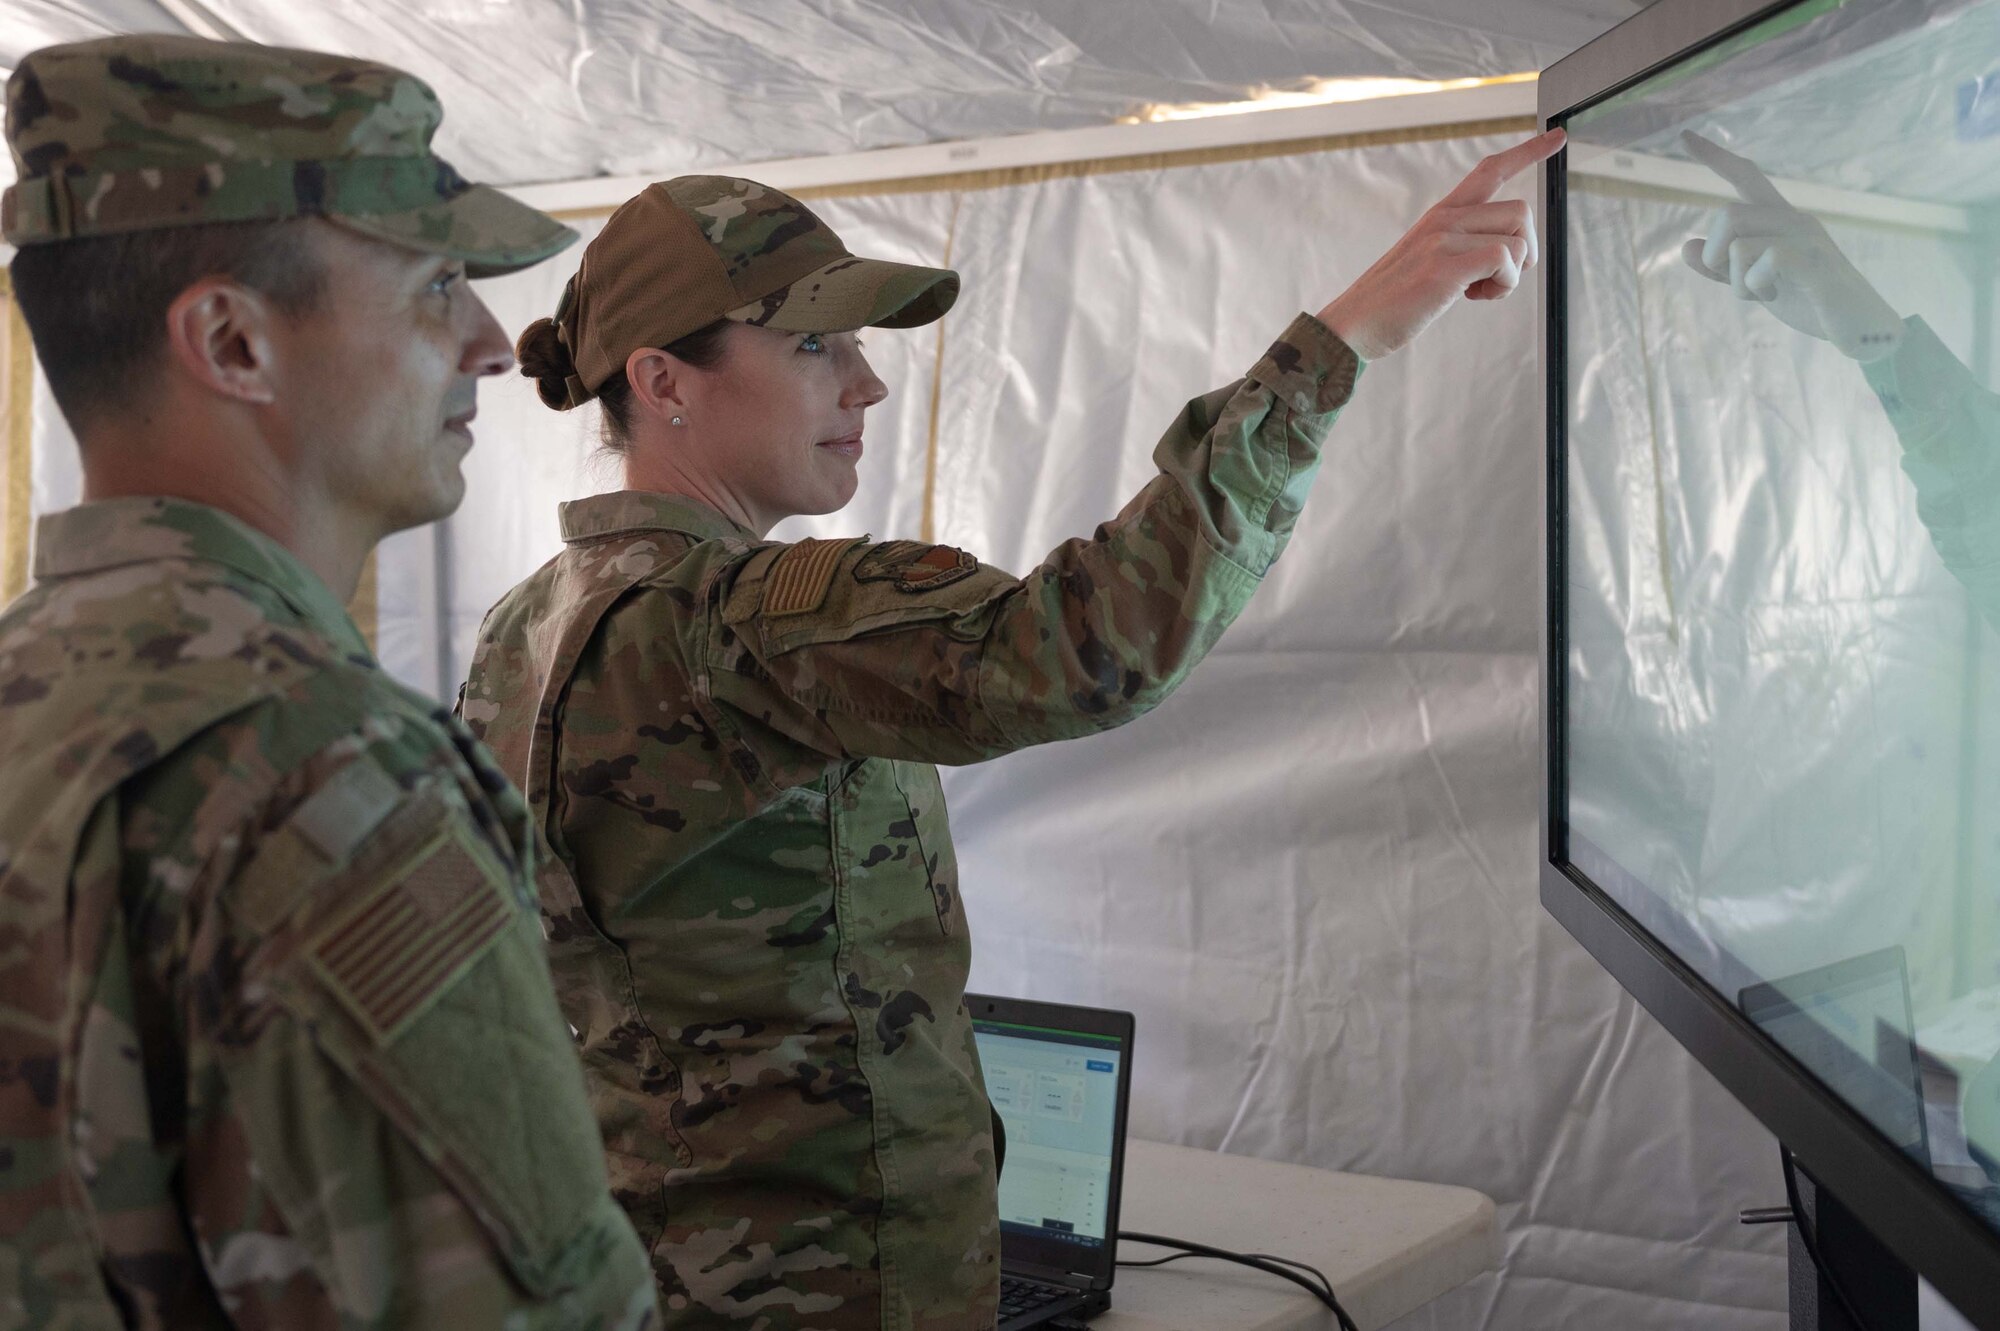 Tech. Sgt. Rhoda Smith (right) and Msgt Antonio Jurado, 162nd FSS Specialists, review data on the National Guard’s interoperability network platform that is used by the CERFP components for command and control communications.